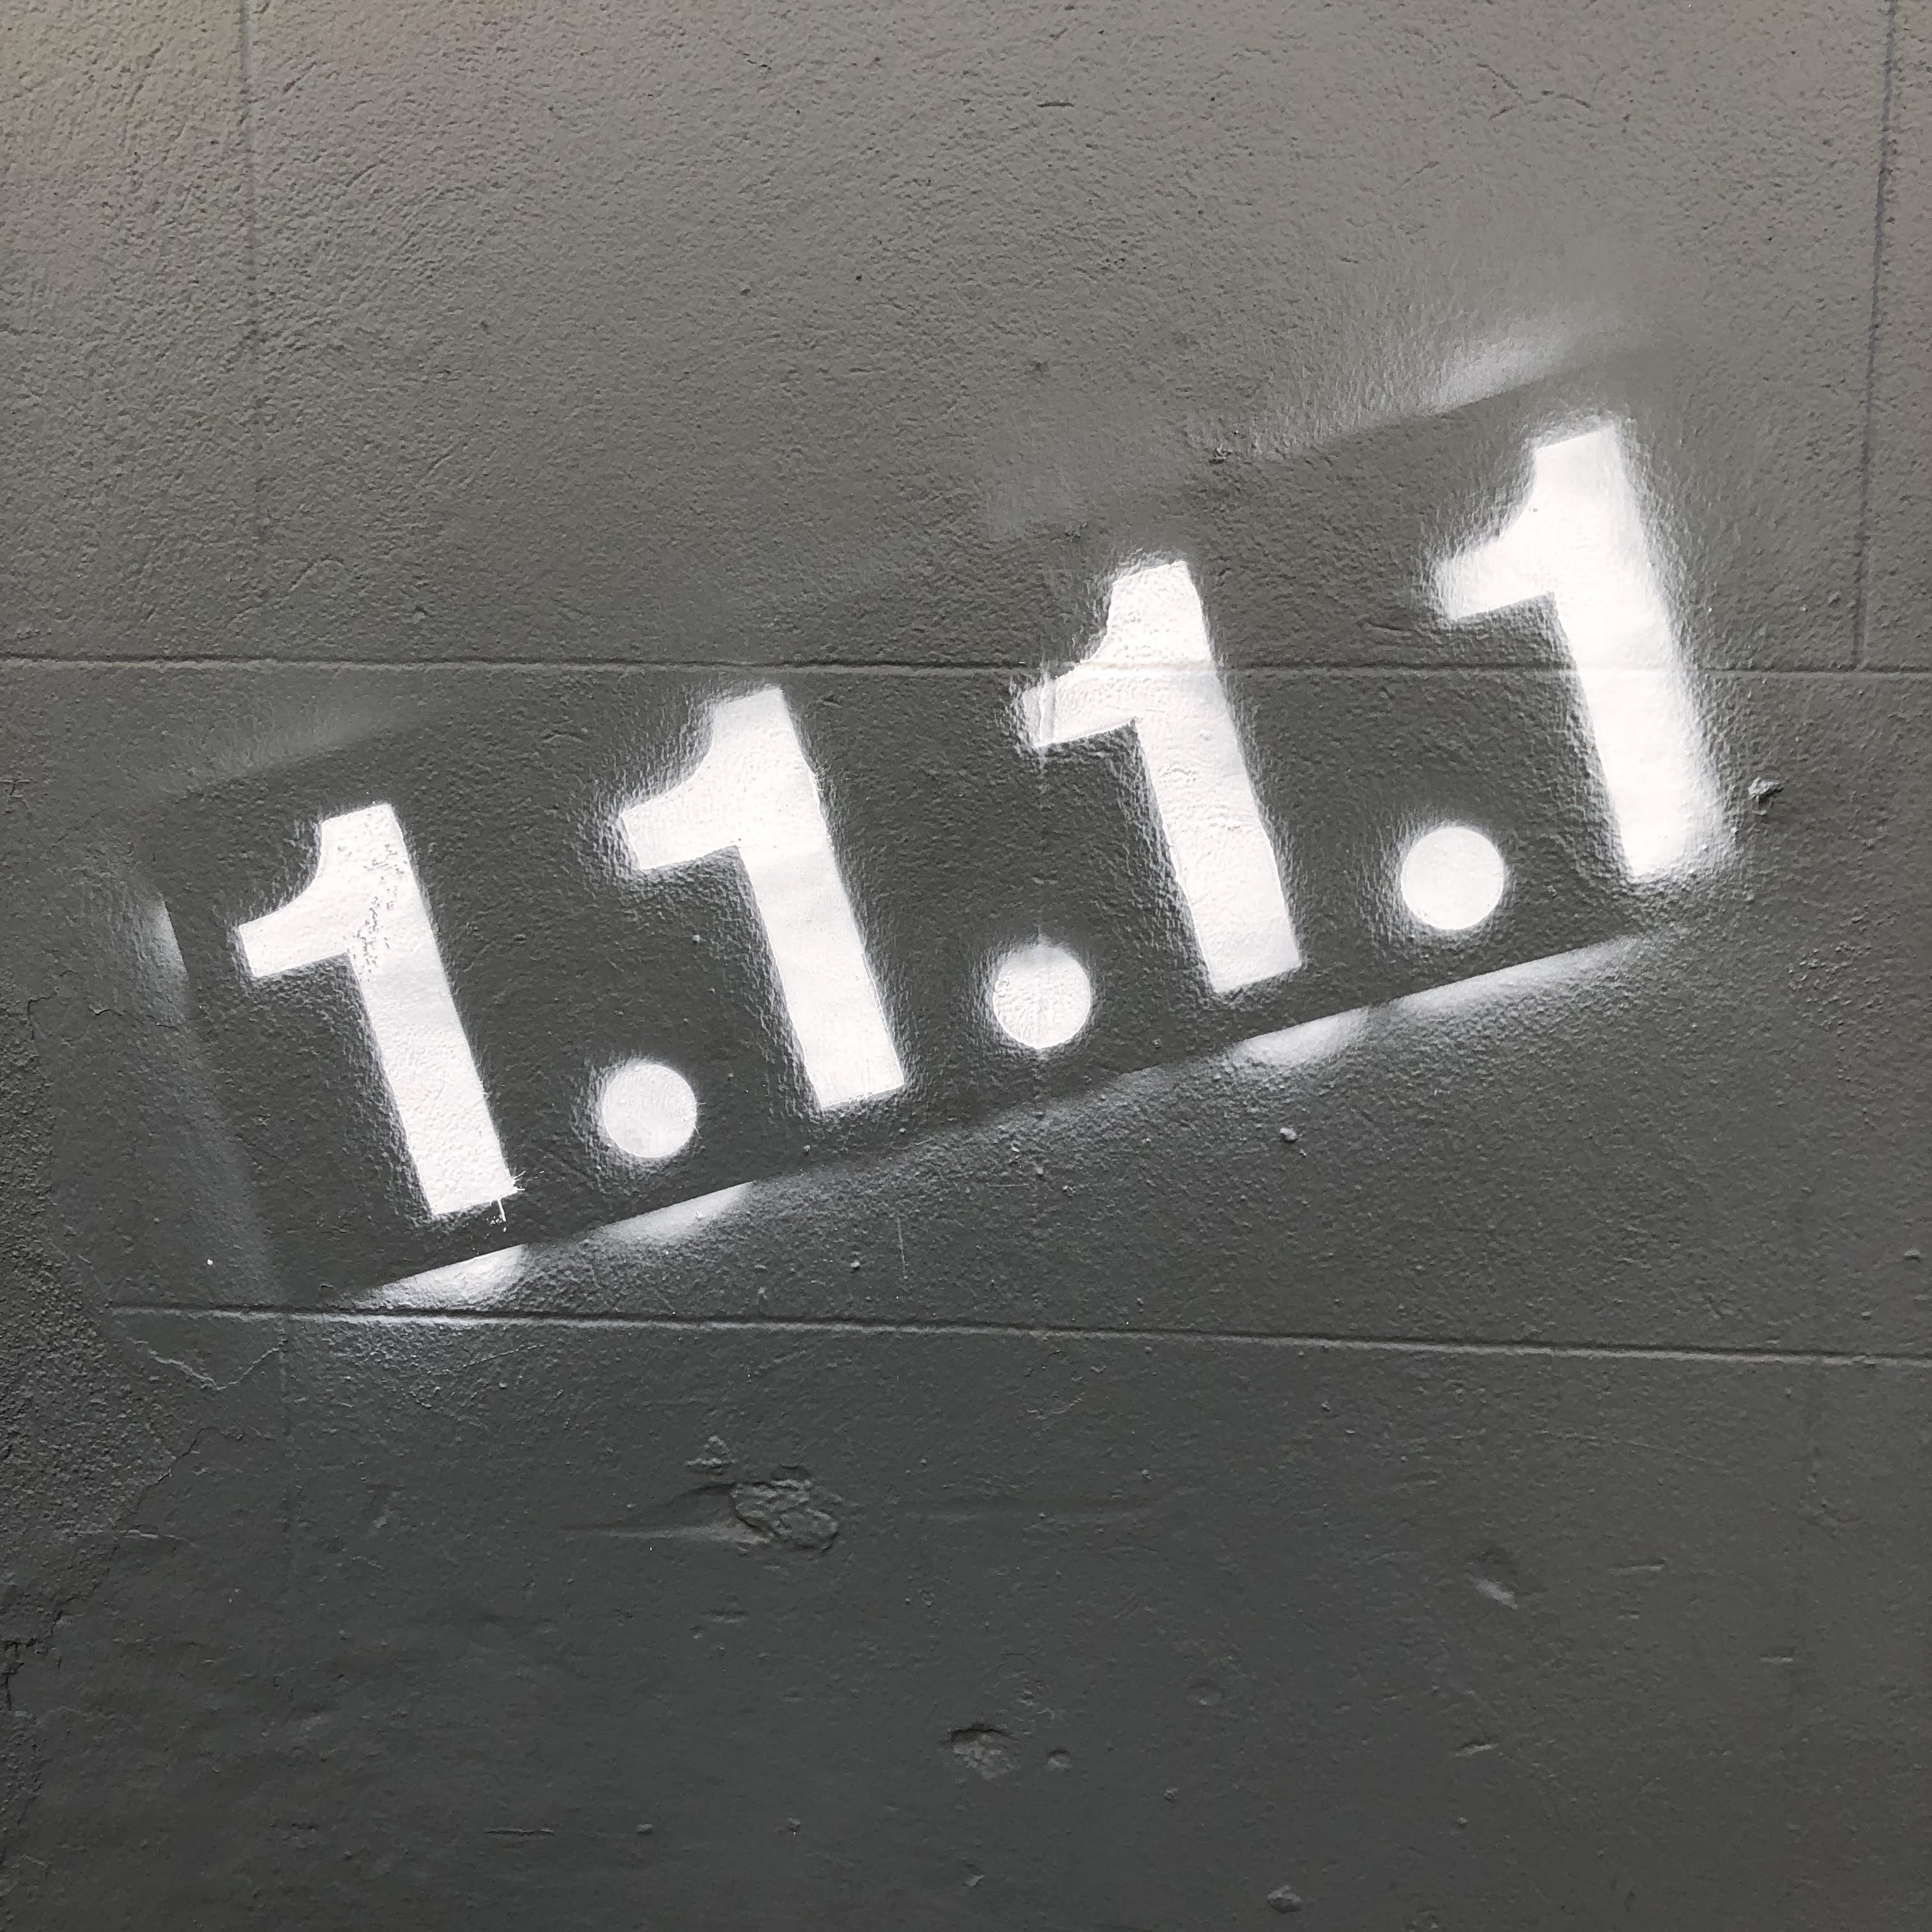 Announcing 1.1.1.1: the fastest, privacy-first consumer DNS service